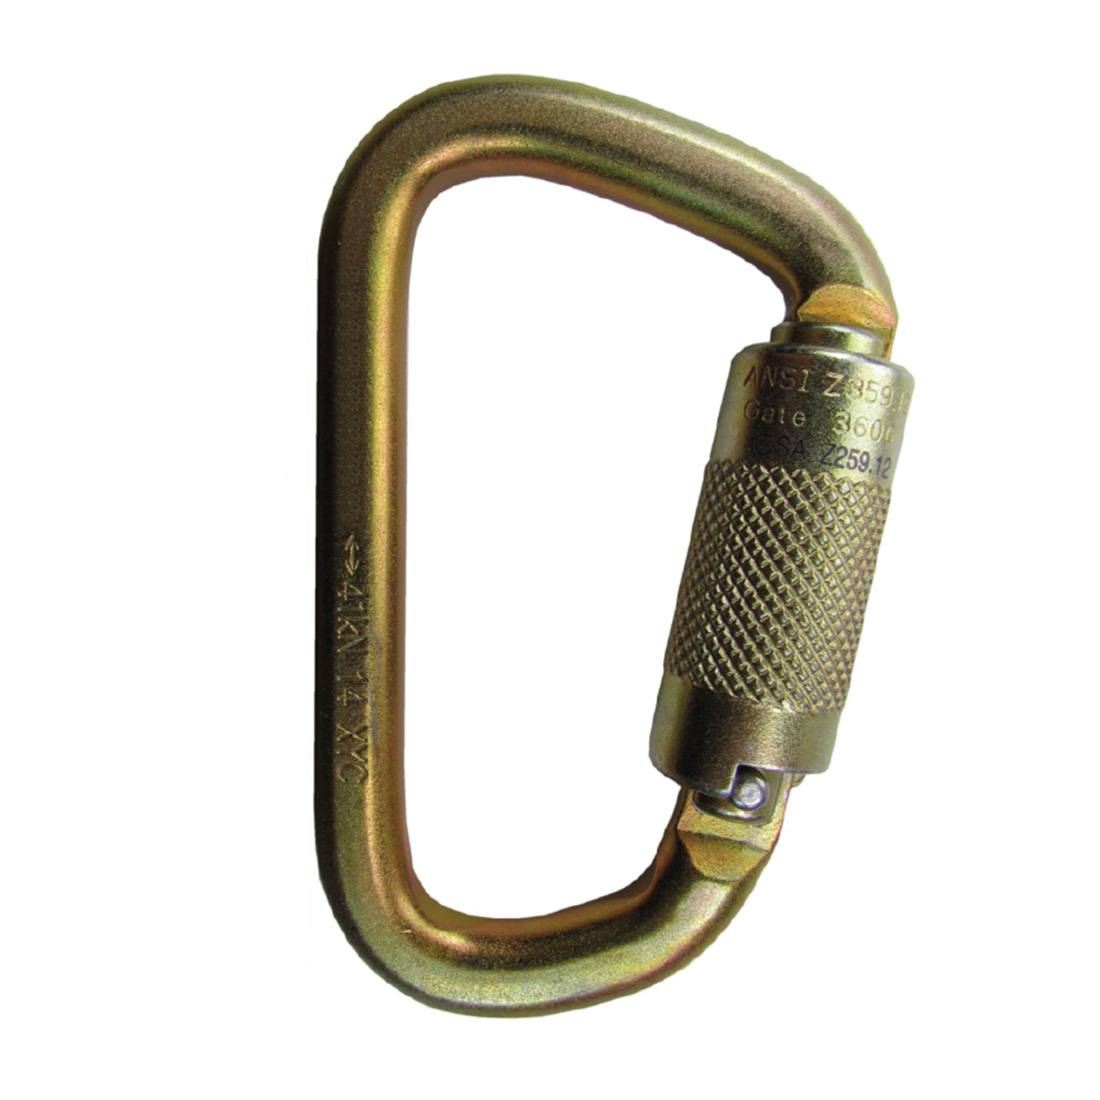 Sky Genie EB-2B Descent Chair System Carabiner View